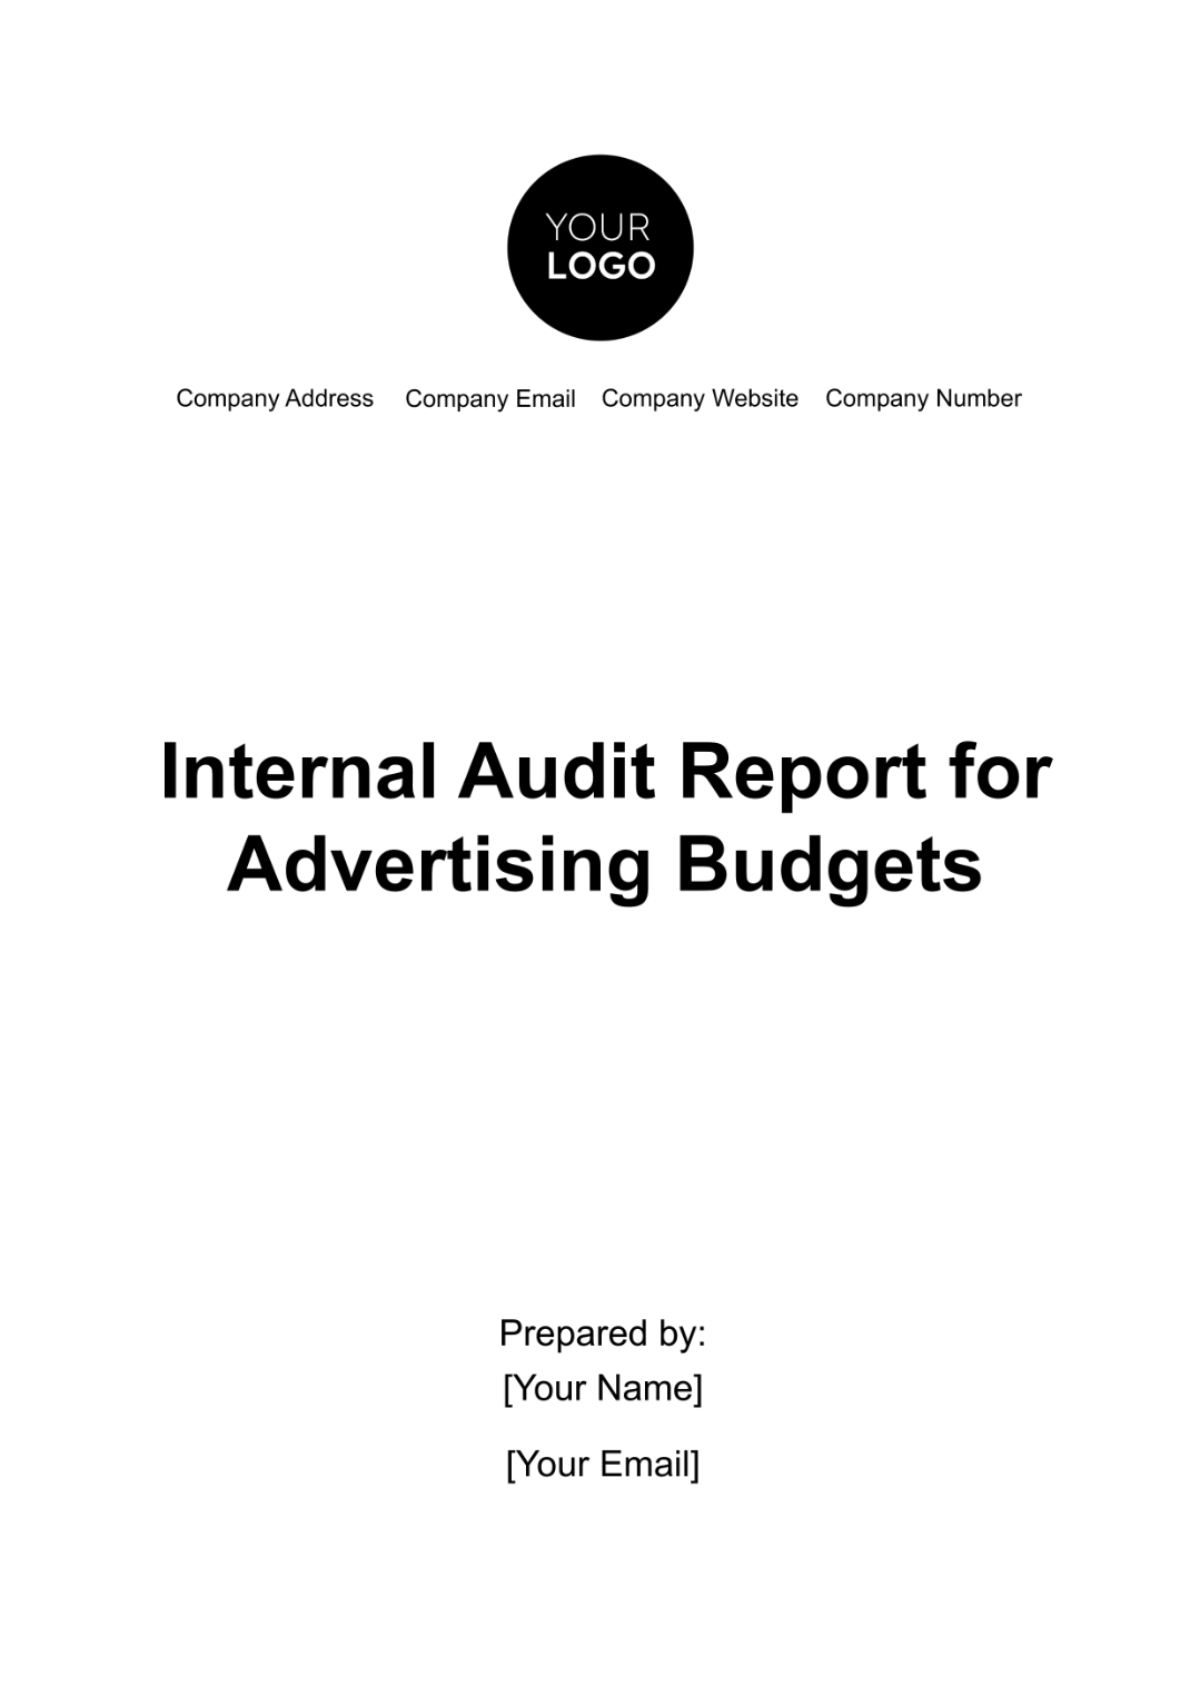 Internal Audit Report for Advertising Budgets Template